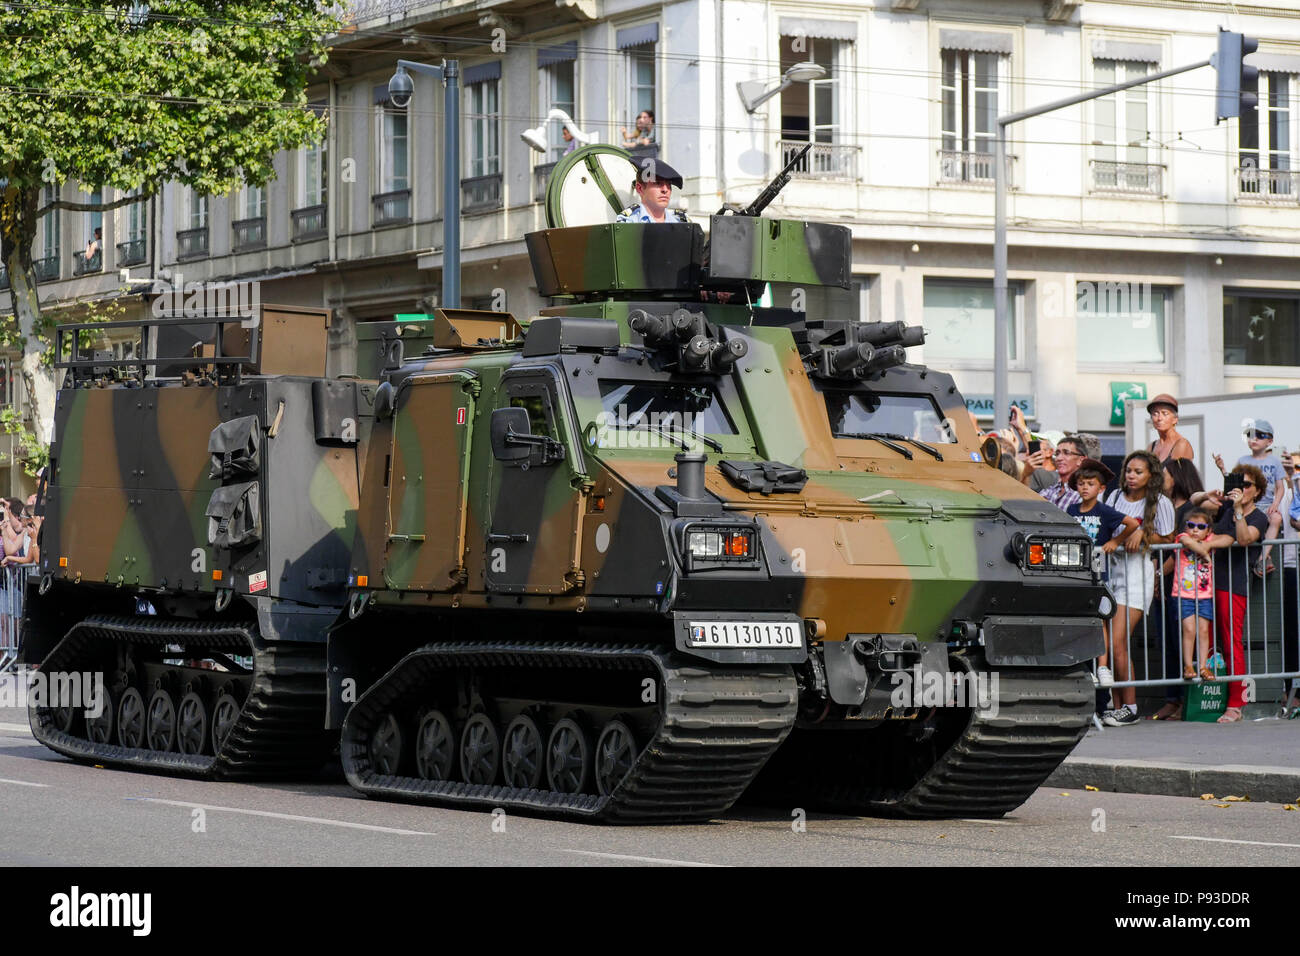 Troops march in Lyon on the occasion off French National Day, Lyon, France Stock Photo